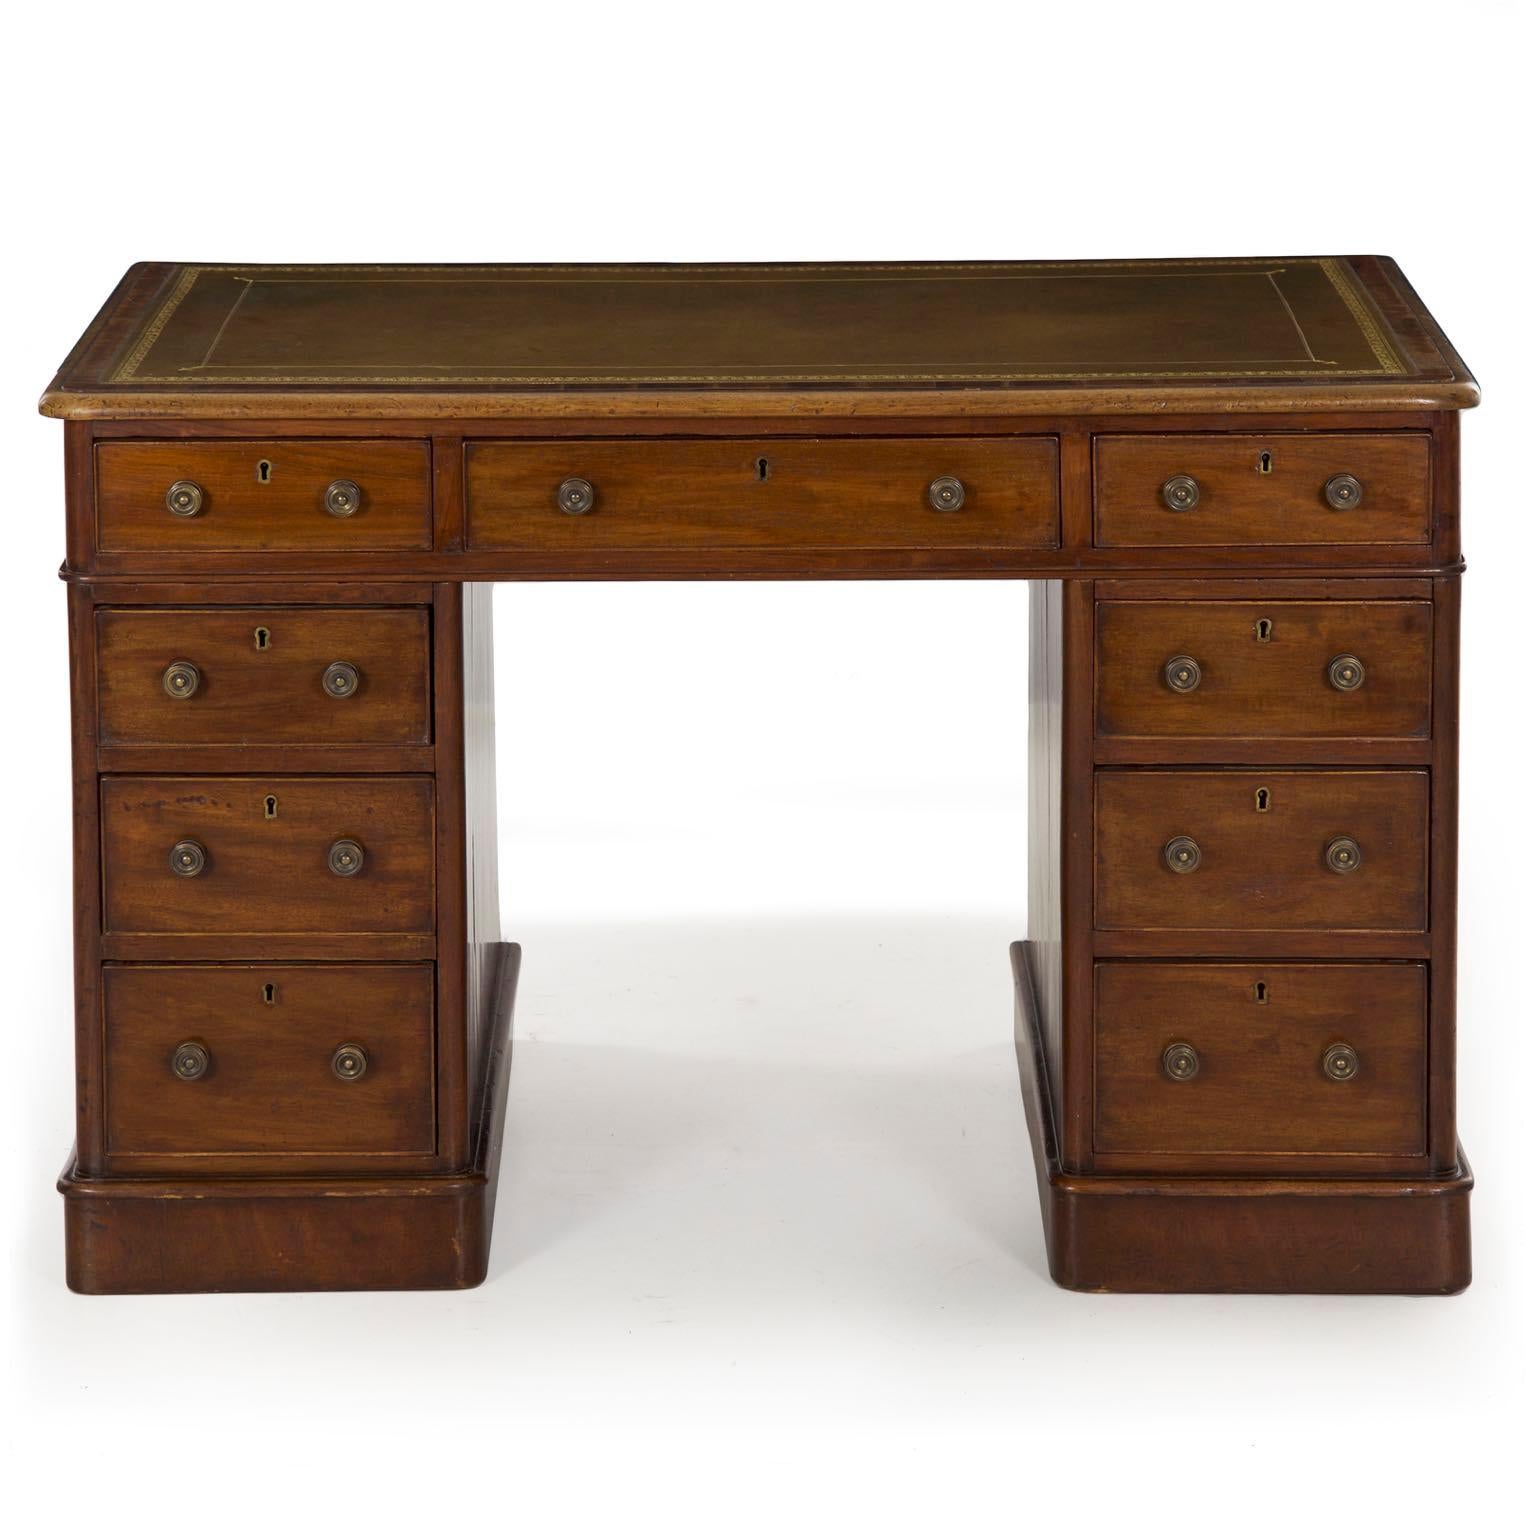 A very nice little writing desk of unusually restrained dimensions for a pedestal form, this product of the Victorian period is beautifully crafted with a mellow olive-green gilt-tooled leather top an attractive patinated mahogany primary surfaces.